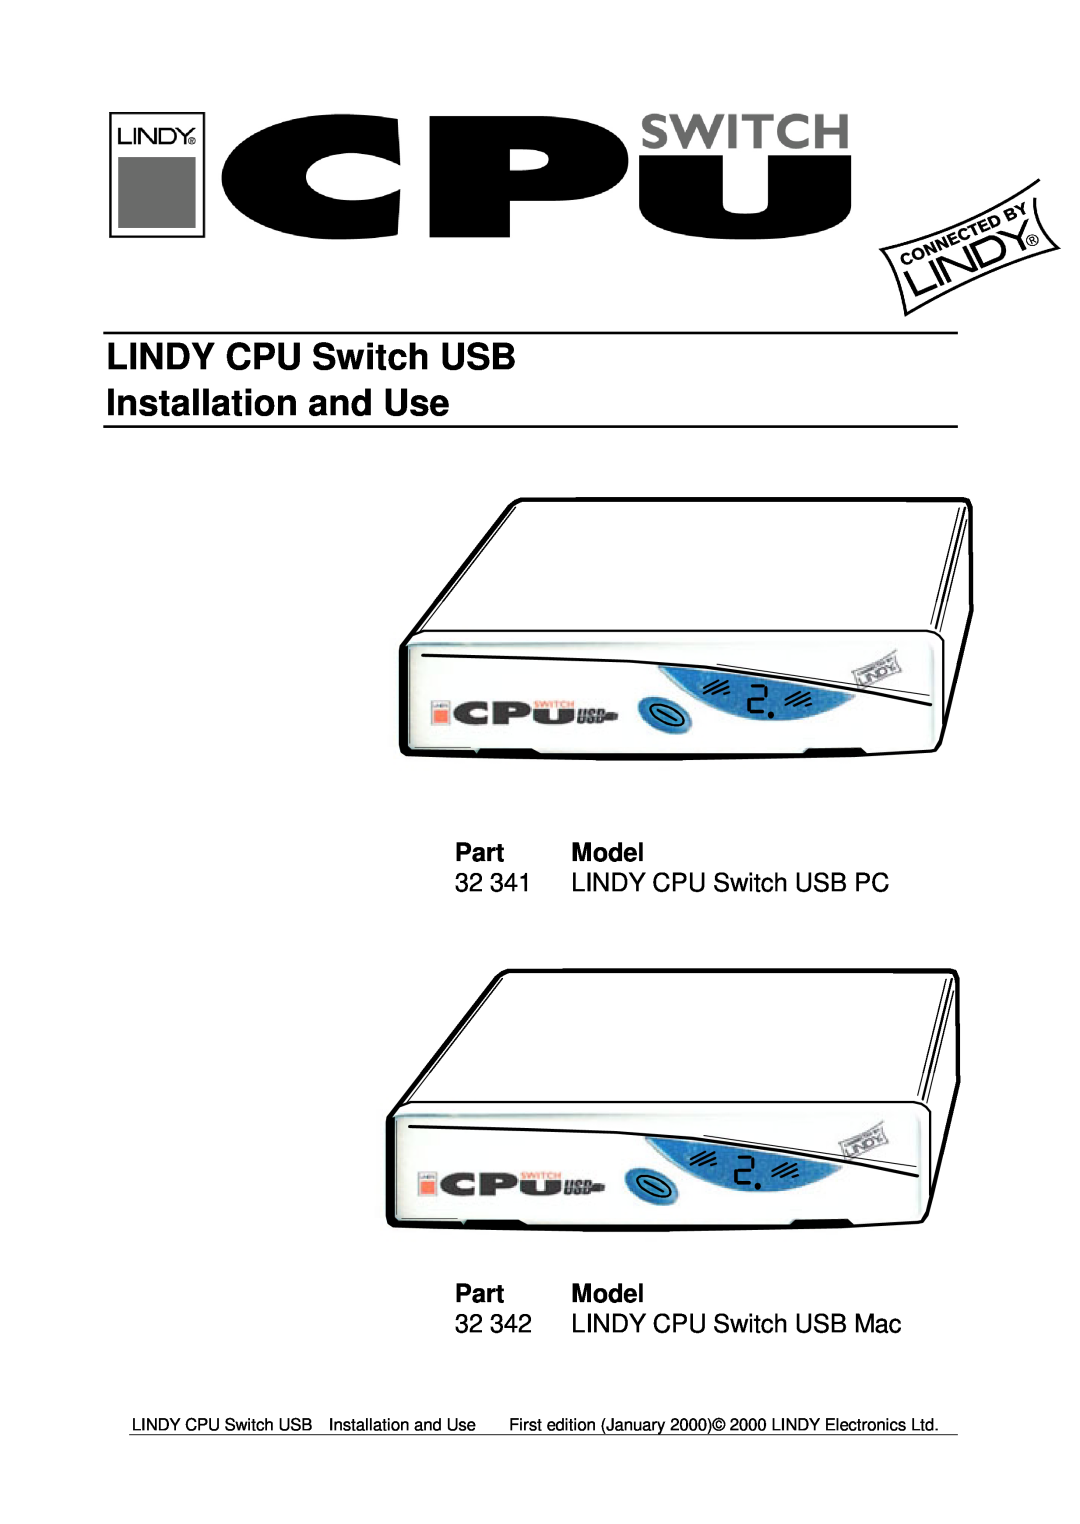 Lindy 32 342 manual LINDY CPU Switch USB Installation and Use, Part Model, 32 341 LINDY CPU Switch USB PC 